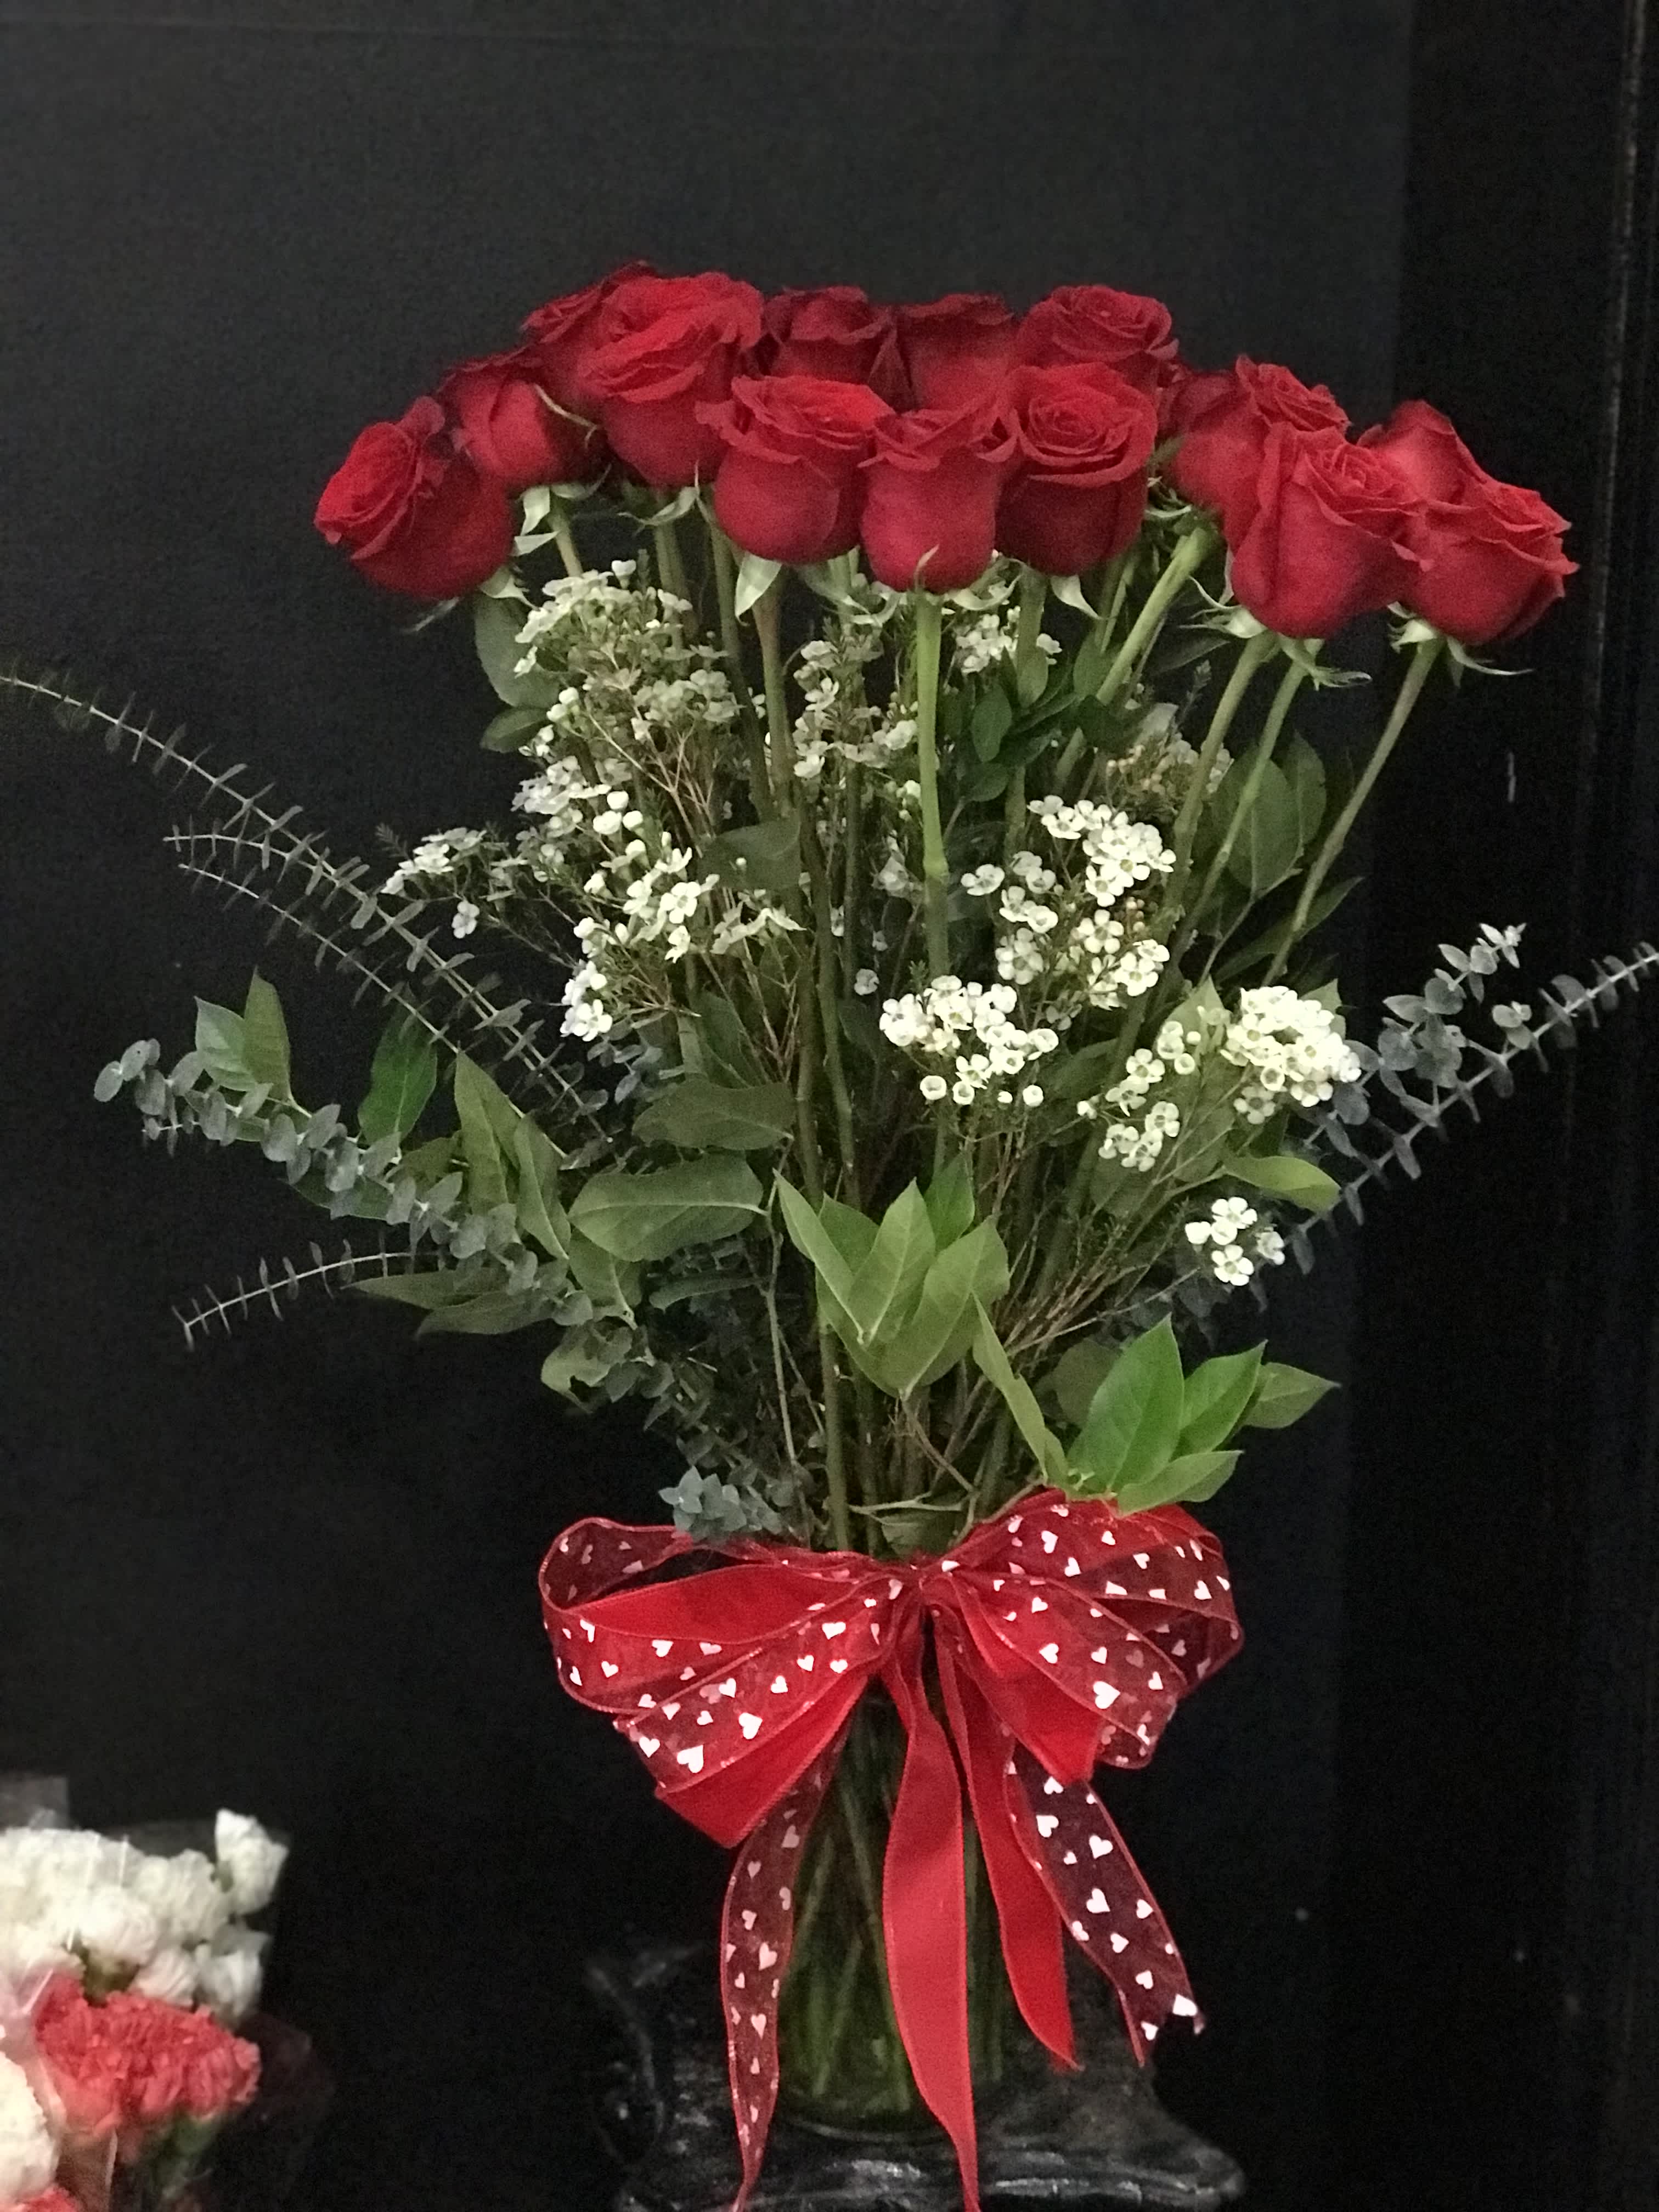 Two dozen red roses - Two dozen red roses with greens, filler, &amp; a red bow